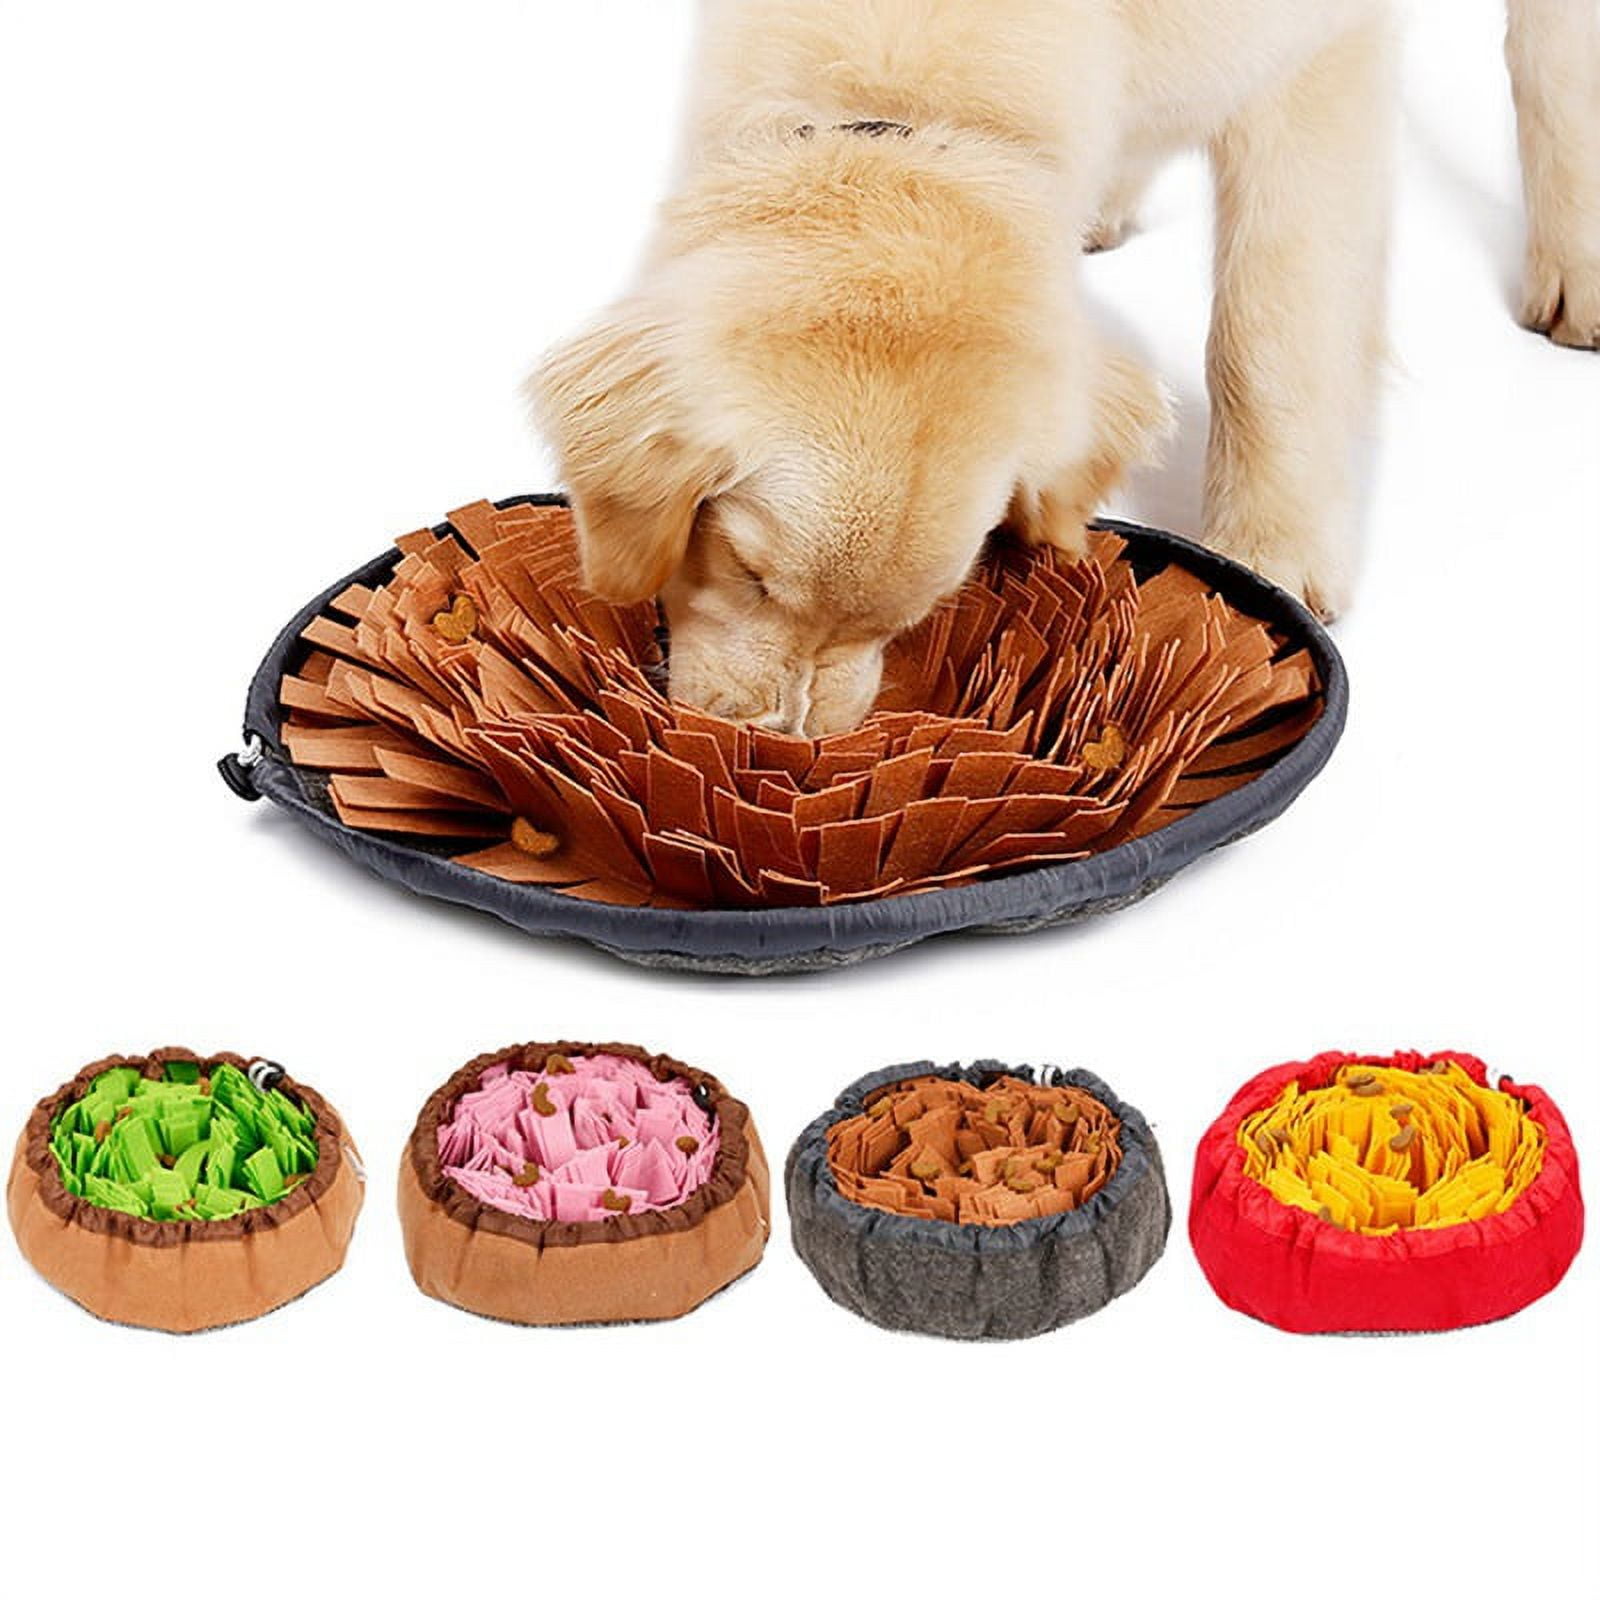 Qweryboo Snuffle Ball for Dog Toys, Encourage Natural Foraging Skills, Slow Food Training, Cloth Strip with Hidden Food Dog Puzzle Toys for Large